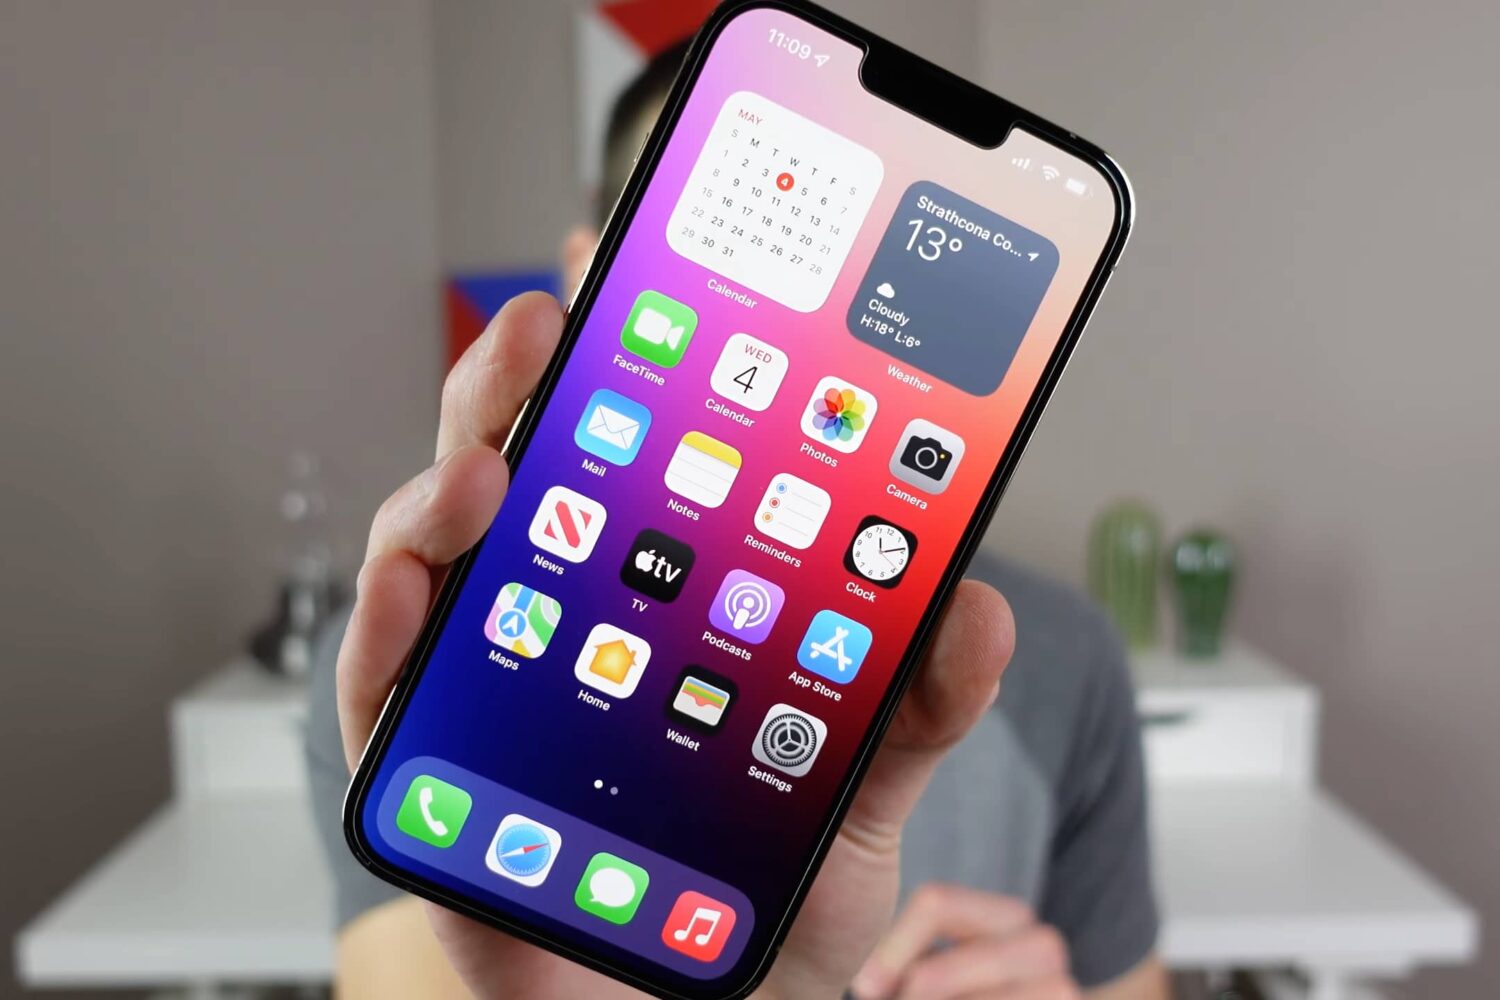 Apple's iPhone 13 Pro Max with home screen widgets and app icons is being held in front of the camera in this still image screenshotted from iDownloadBlog's video walkthrough covering 15 iPhone settings designed for optimal experience